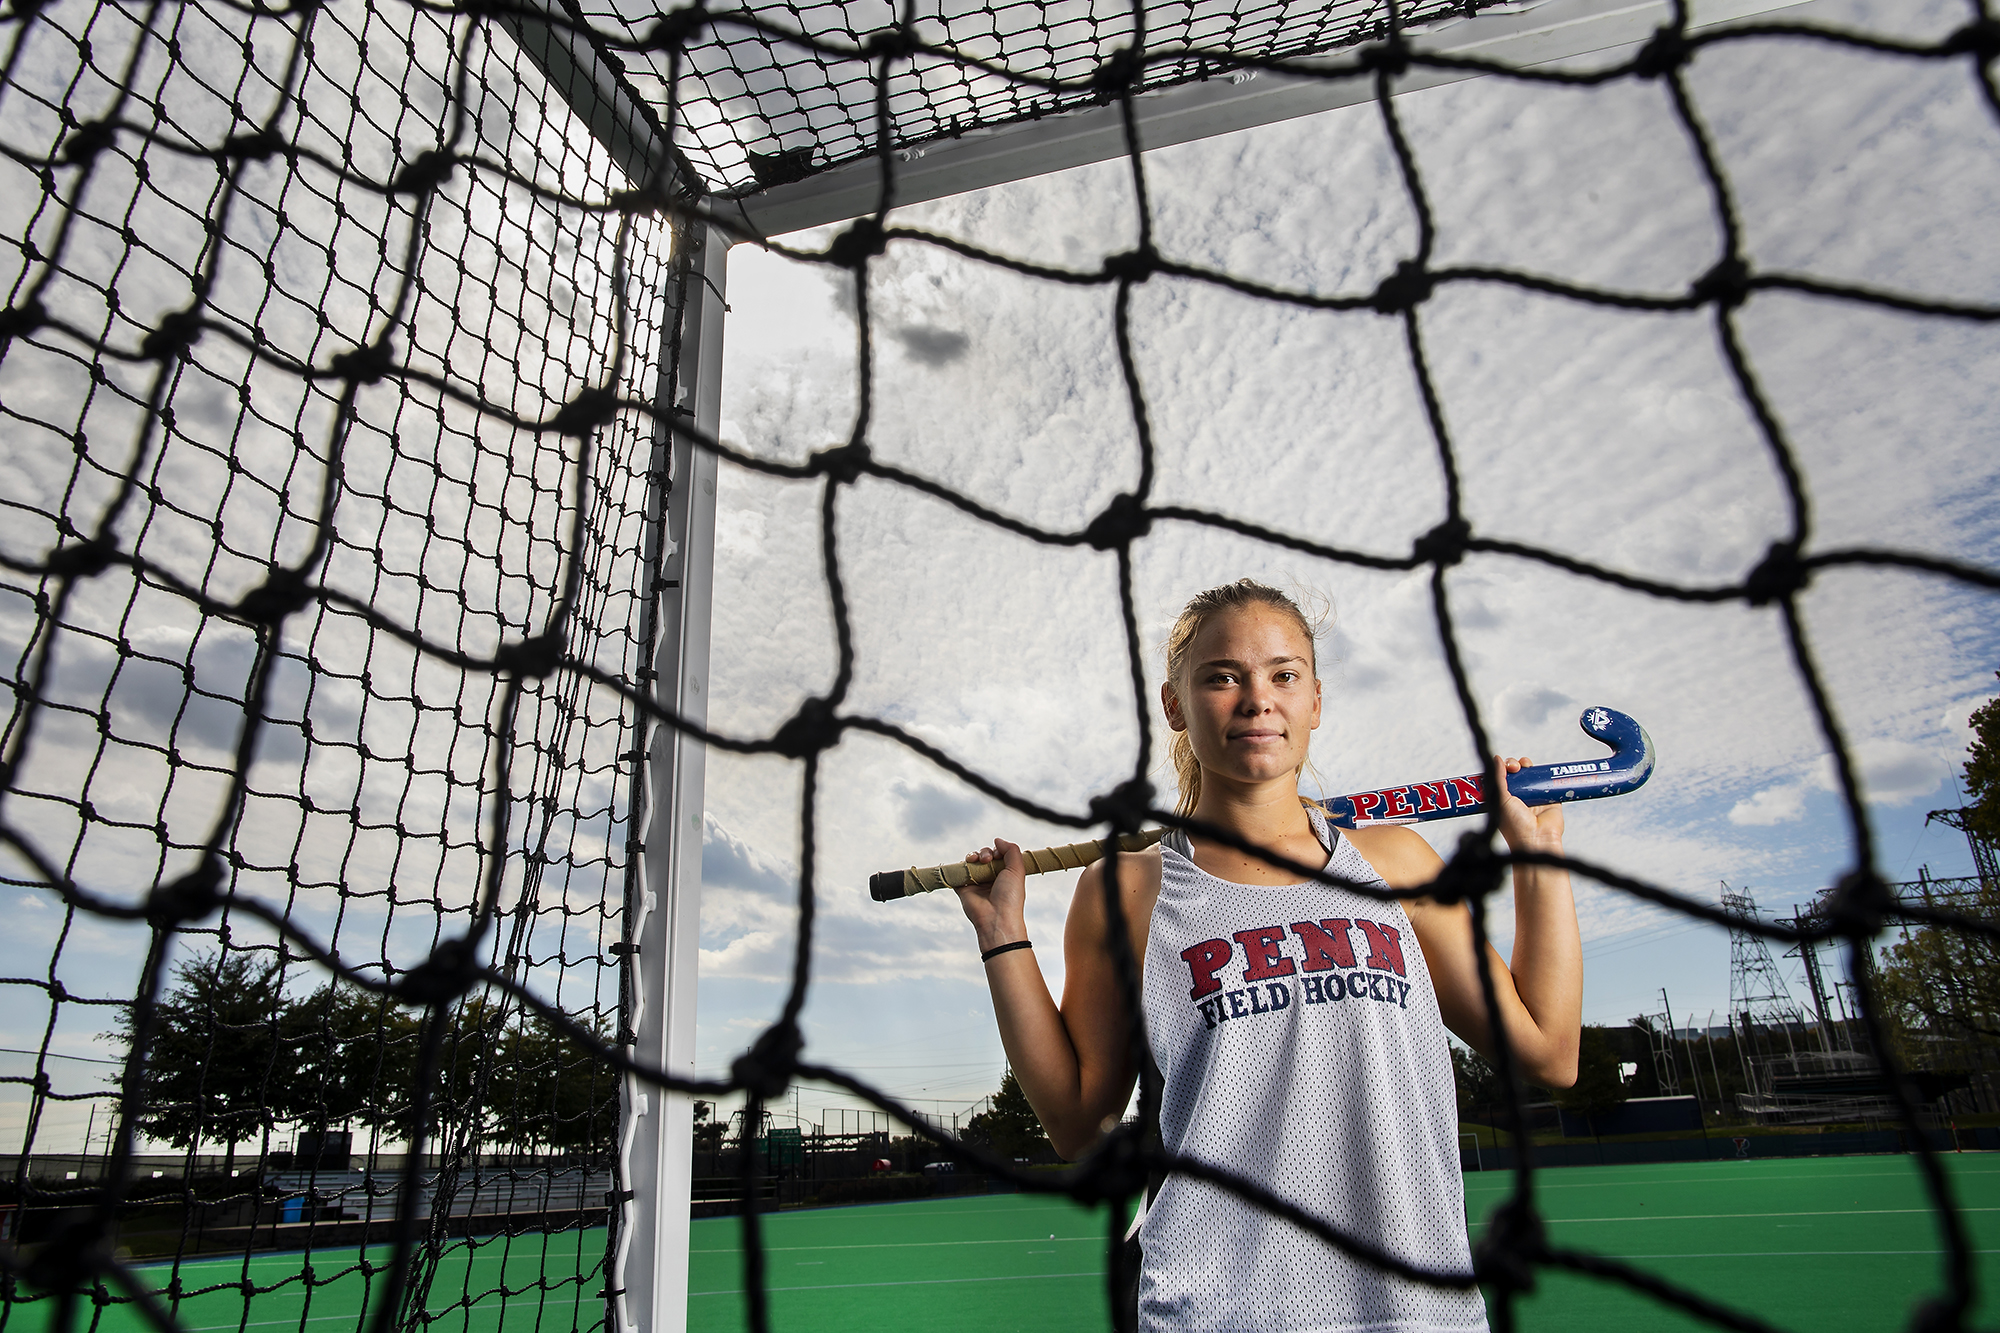 Alexa Schneck of the field hockey team poses on the field hockey field in a net with her stick across her shoulders.